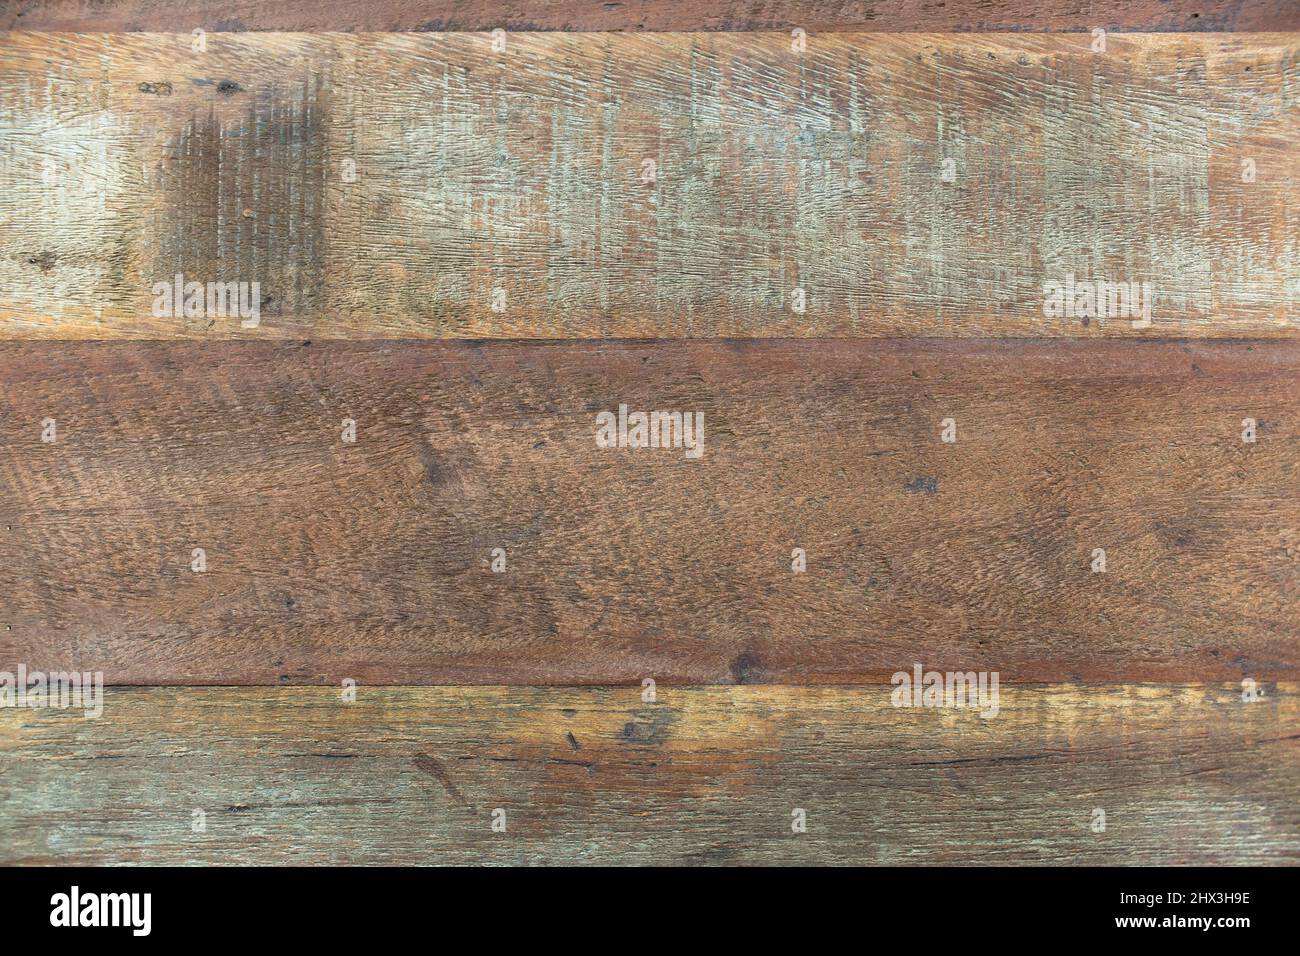 Recycled old wooden planks background Stock Photo